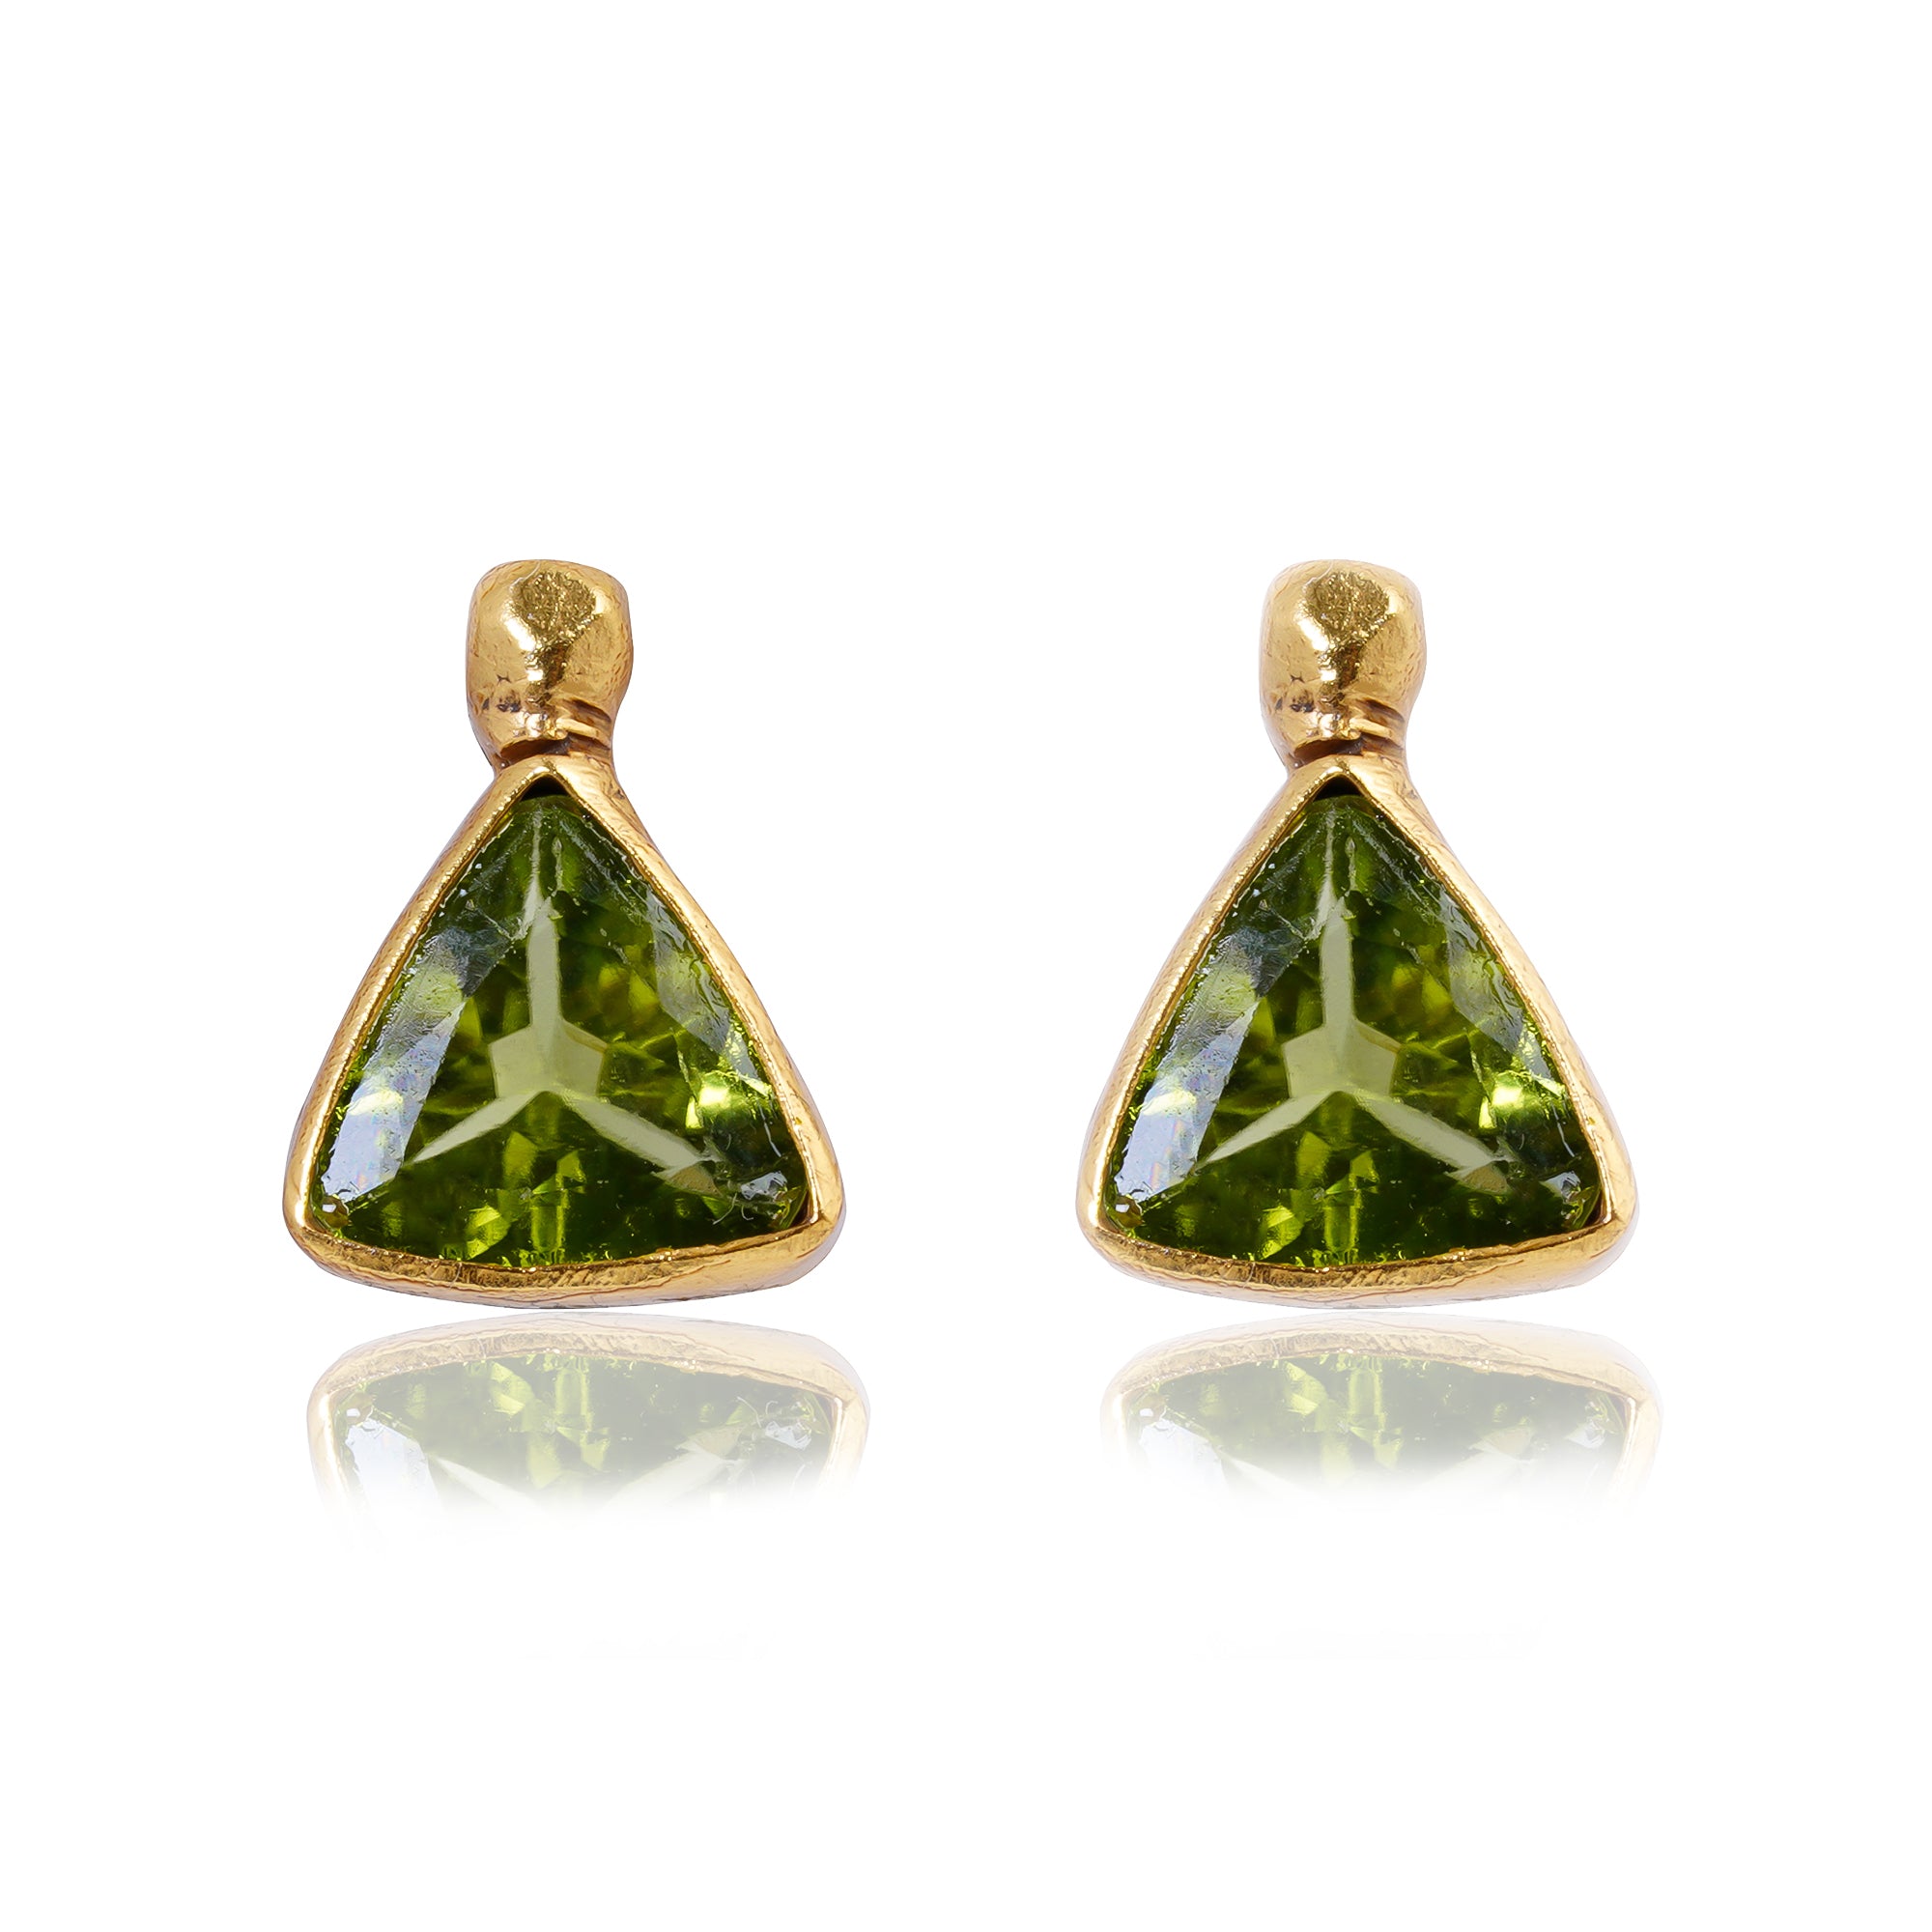 Buy Handcrafted Silver Gold Plated Peridot Earring